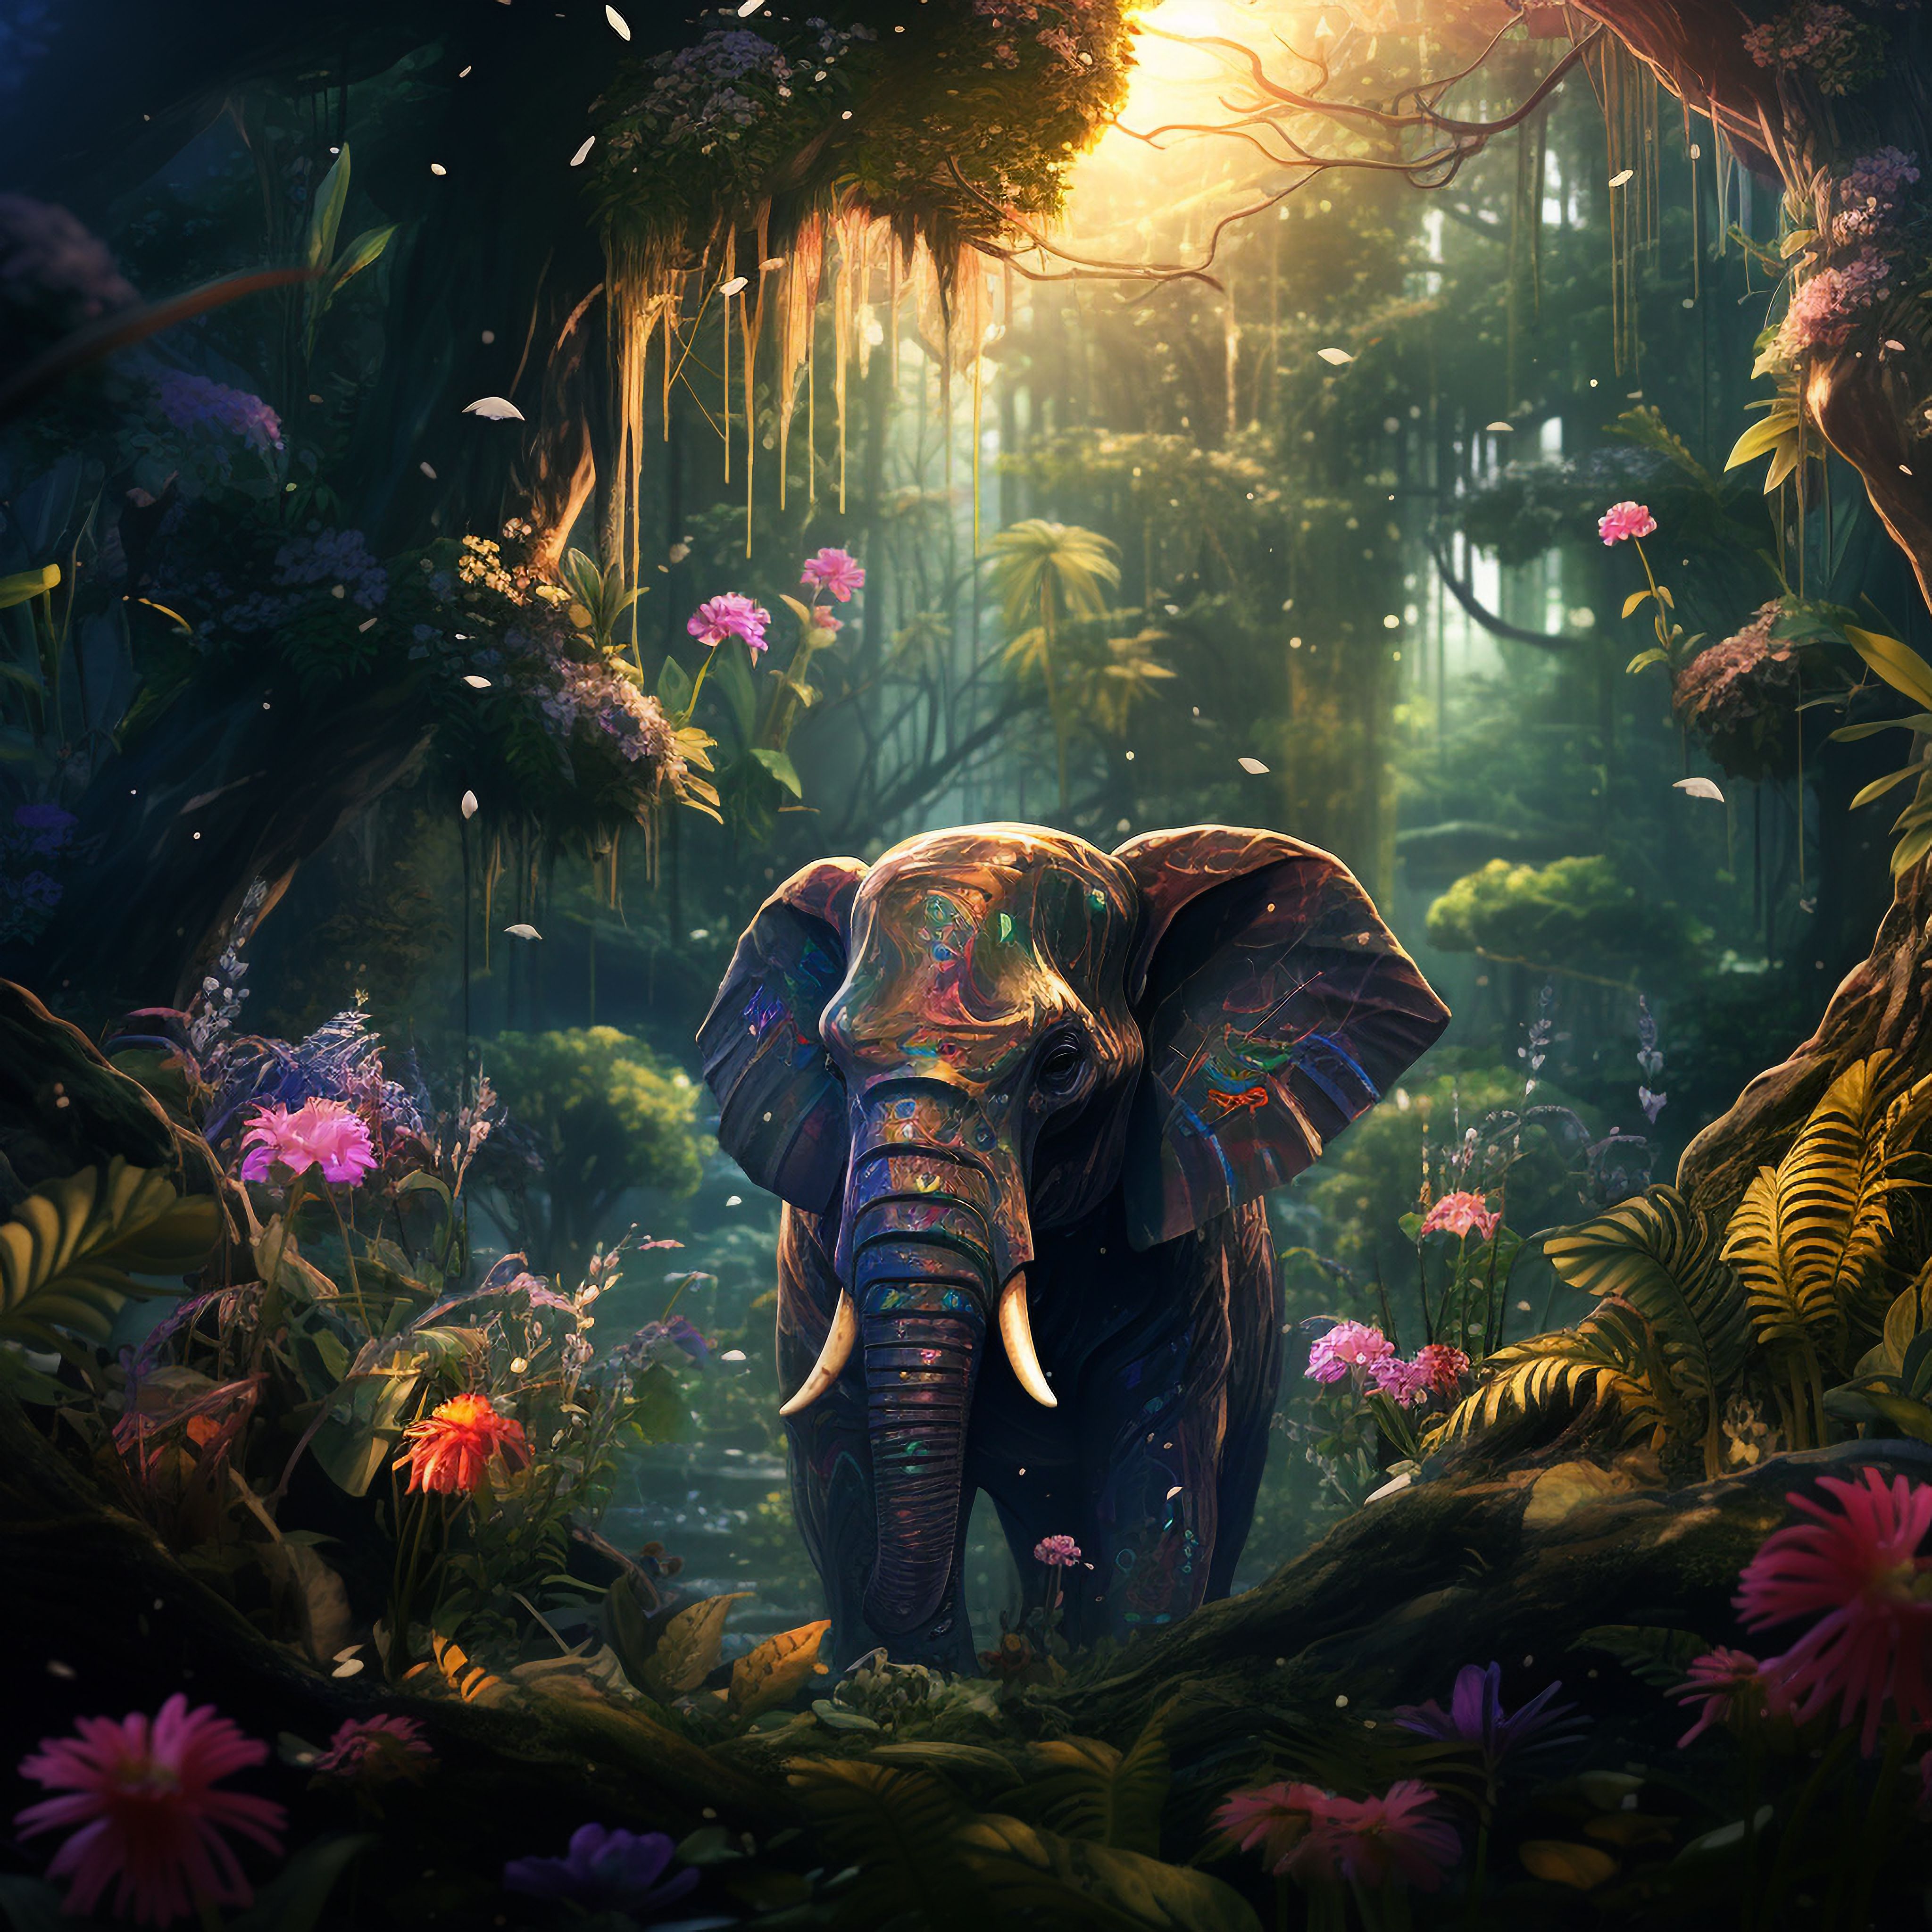 Magical Forest - Elephant